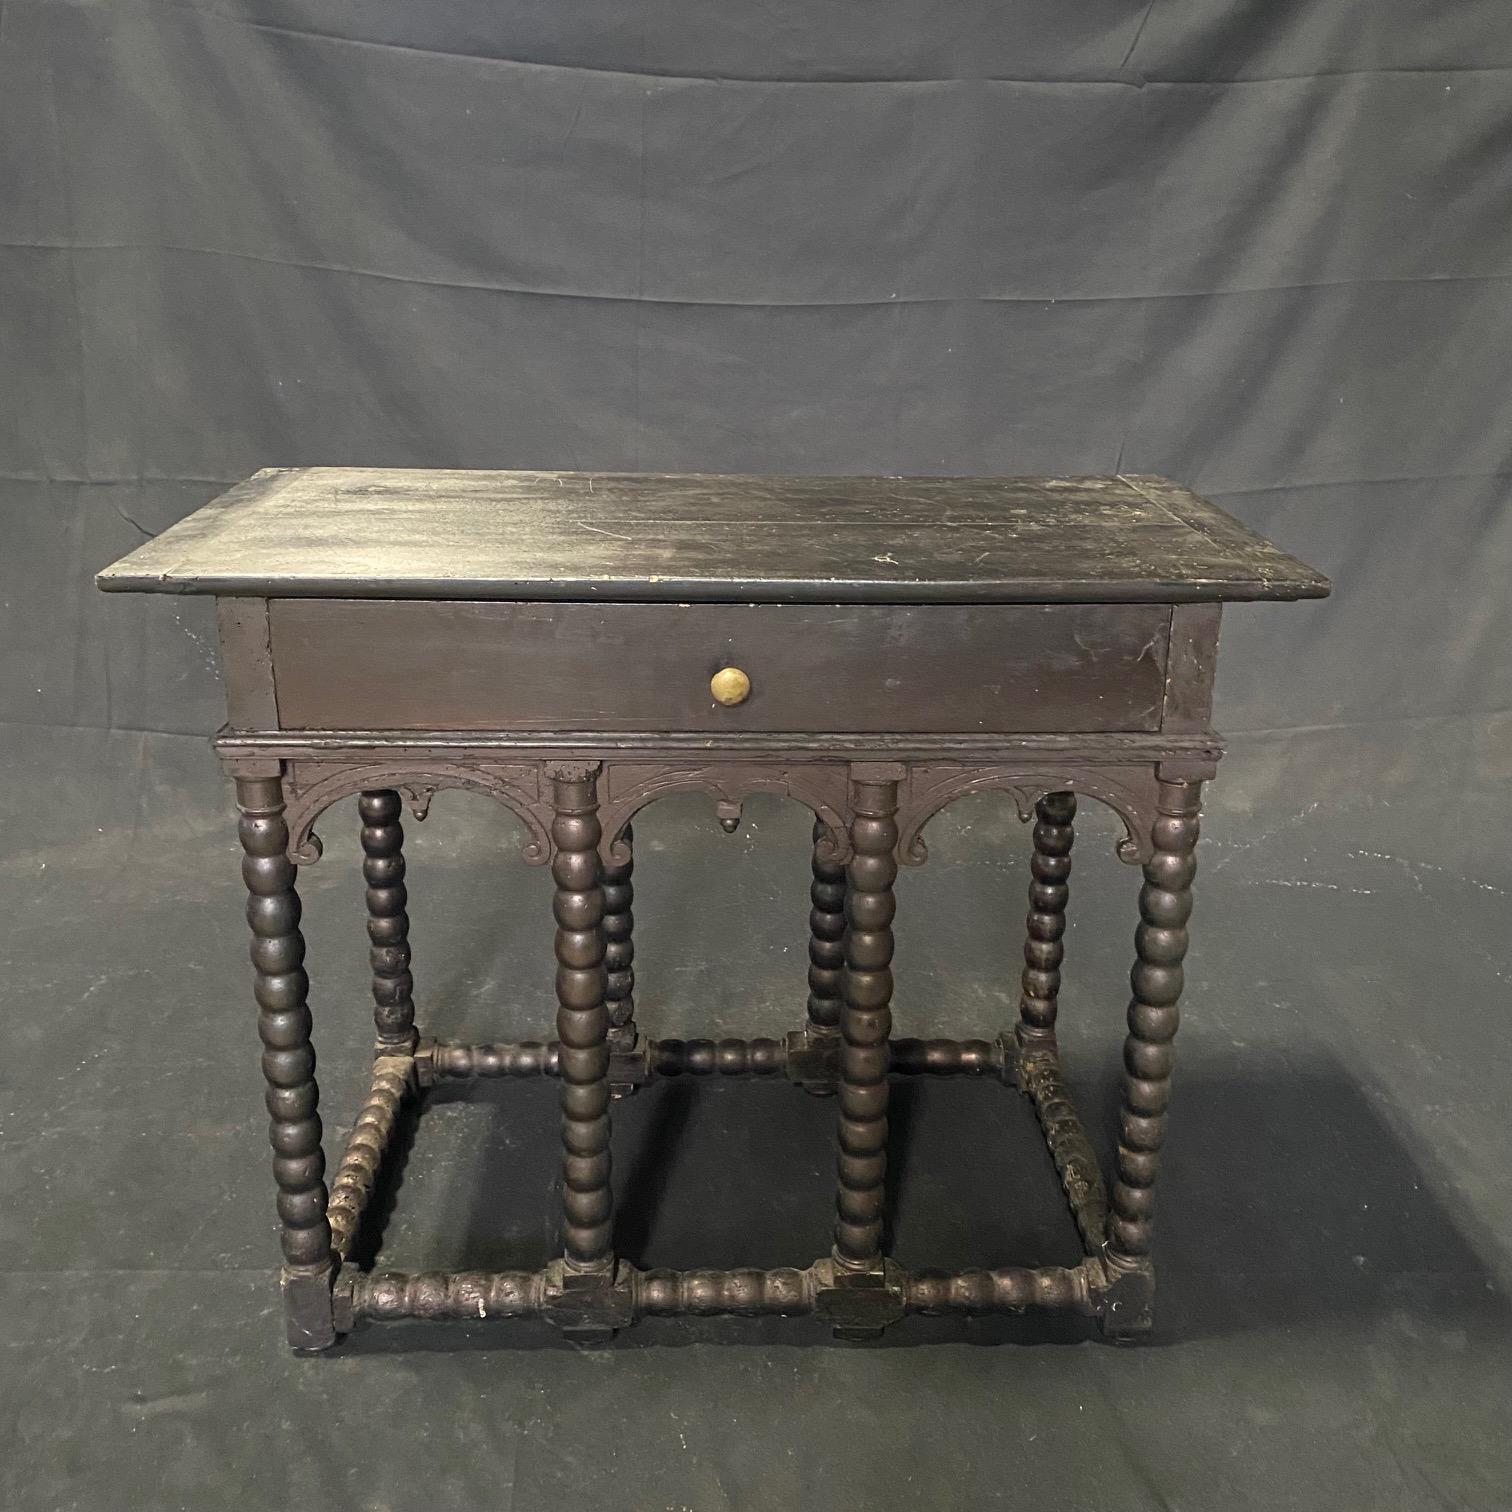  19th century ebony console table or entry hall table was made in the Renaissance style and also emulates Napoleon III, with the early eight barley twist legs, all connected with a barley twist stretcher. What makes this antique console or hall